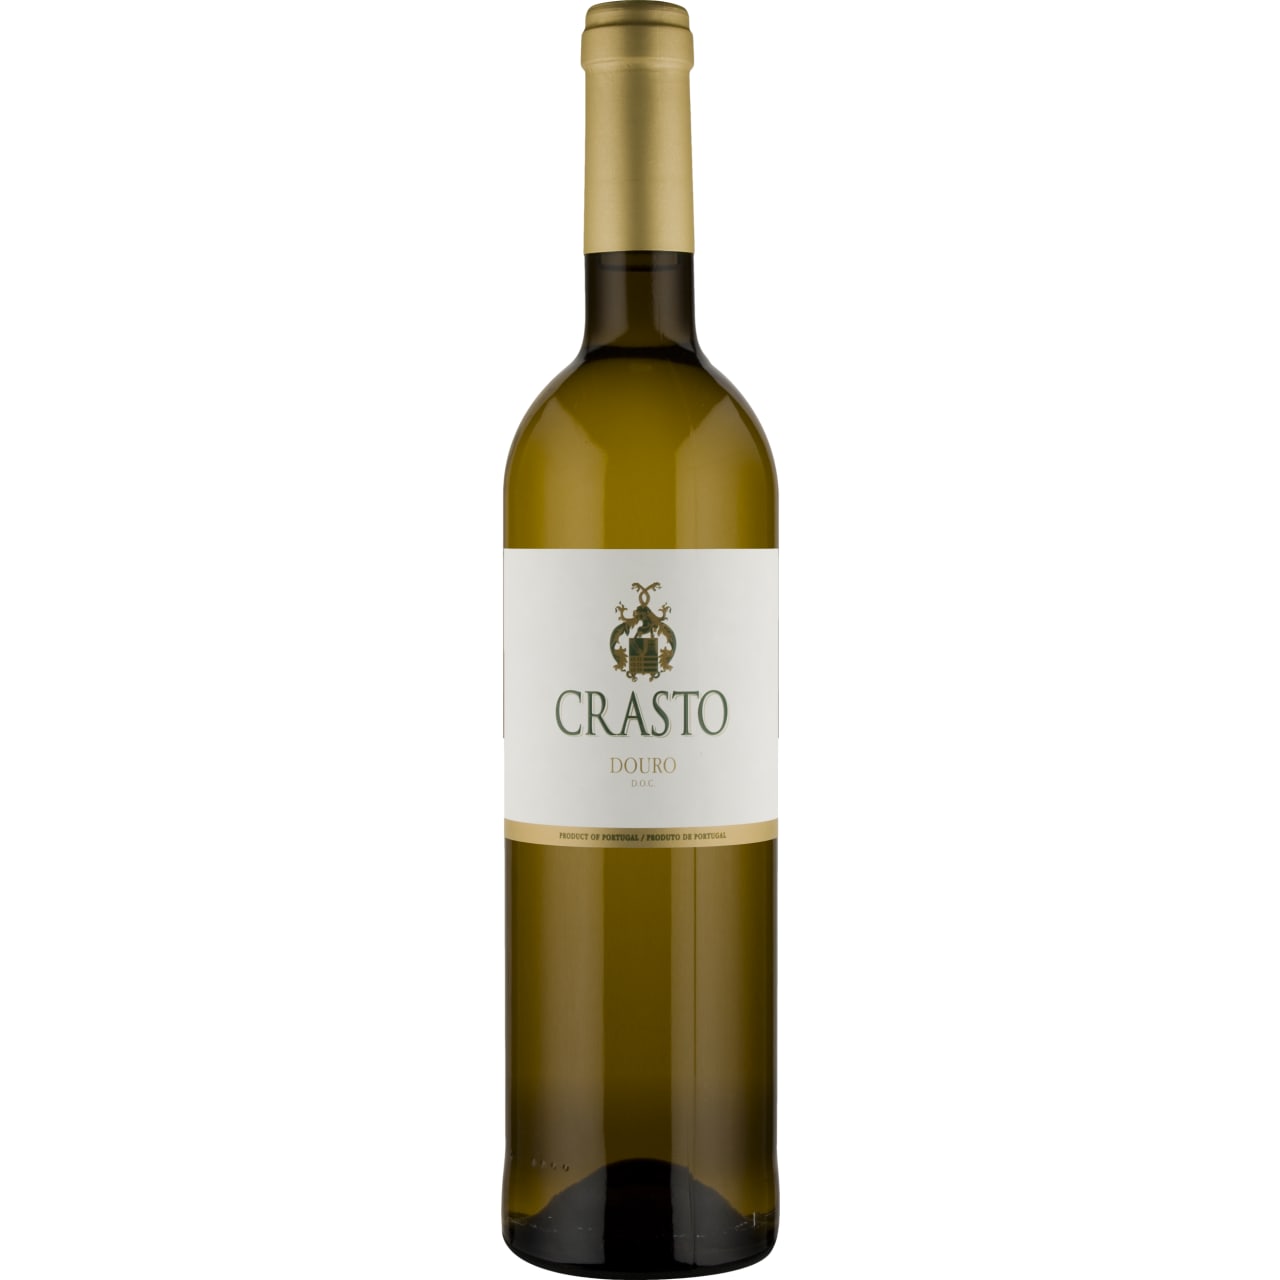 This is a fresh, tasty white wine from one of Portugal's leading wine producers of the Douro valley.